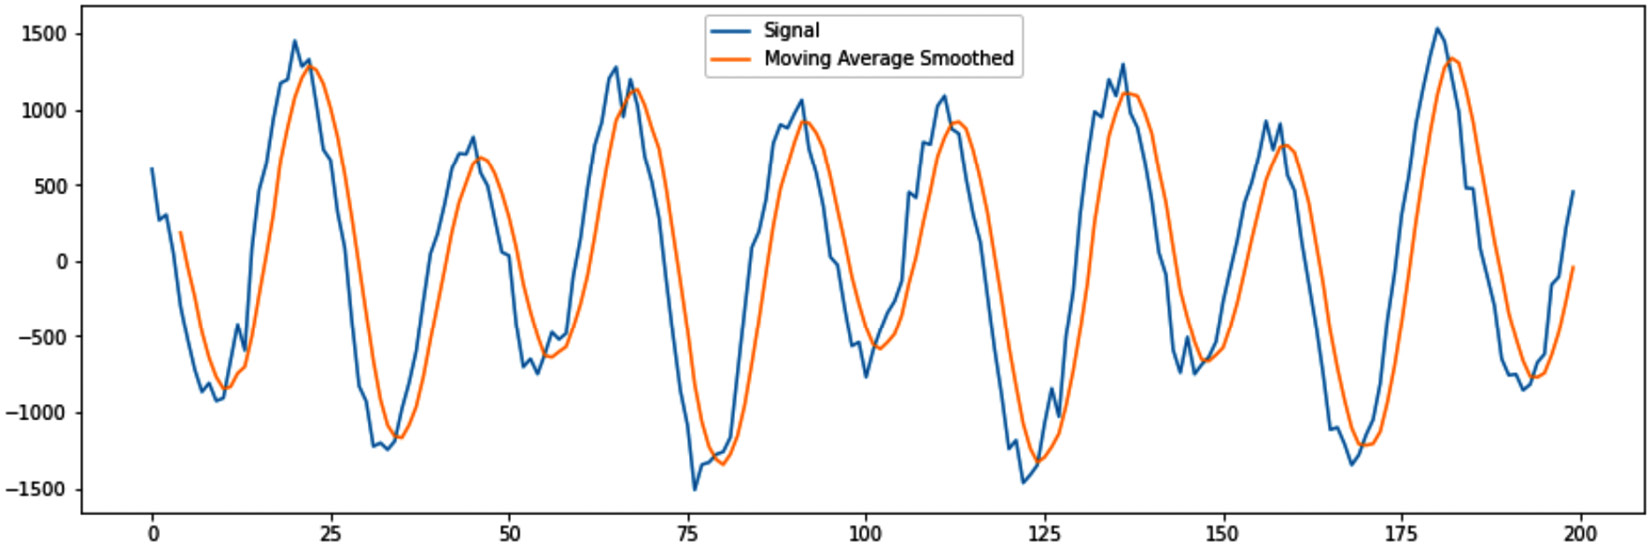 Figure 14.22 – Moving Average Smoothing using window rolling calculations
